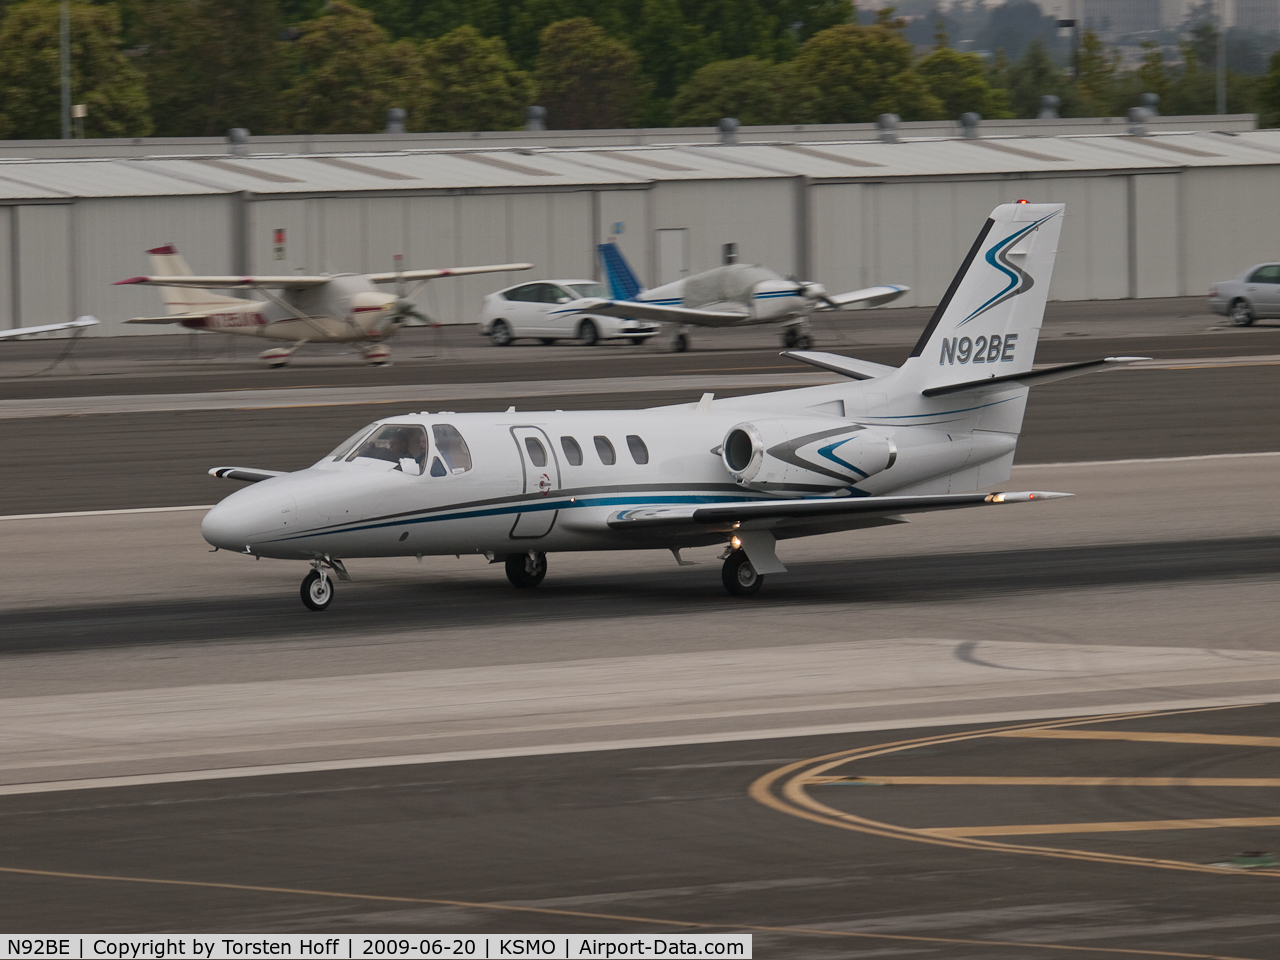 N92BE, 1980 Cessna 501 Citation I SP C/N 501-0098, N92BE departing from RWY 21